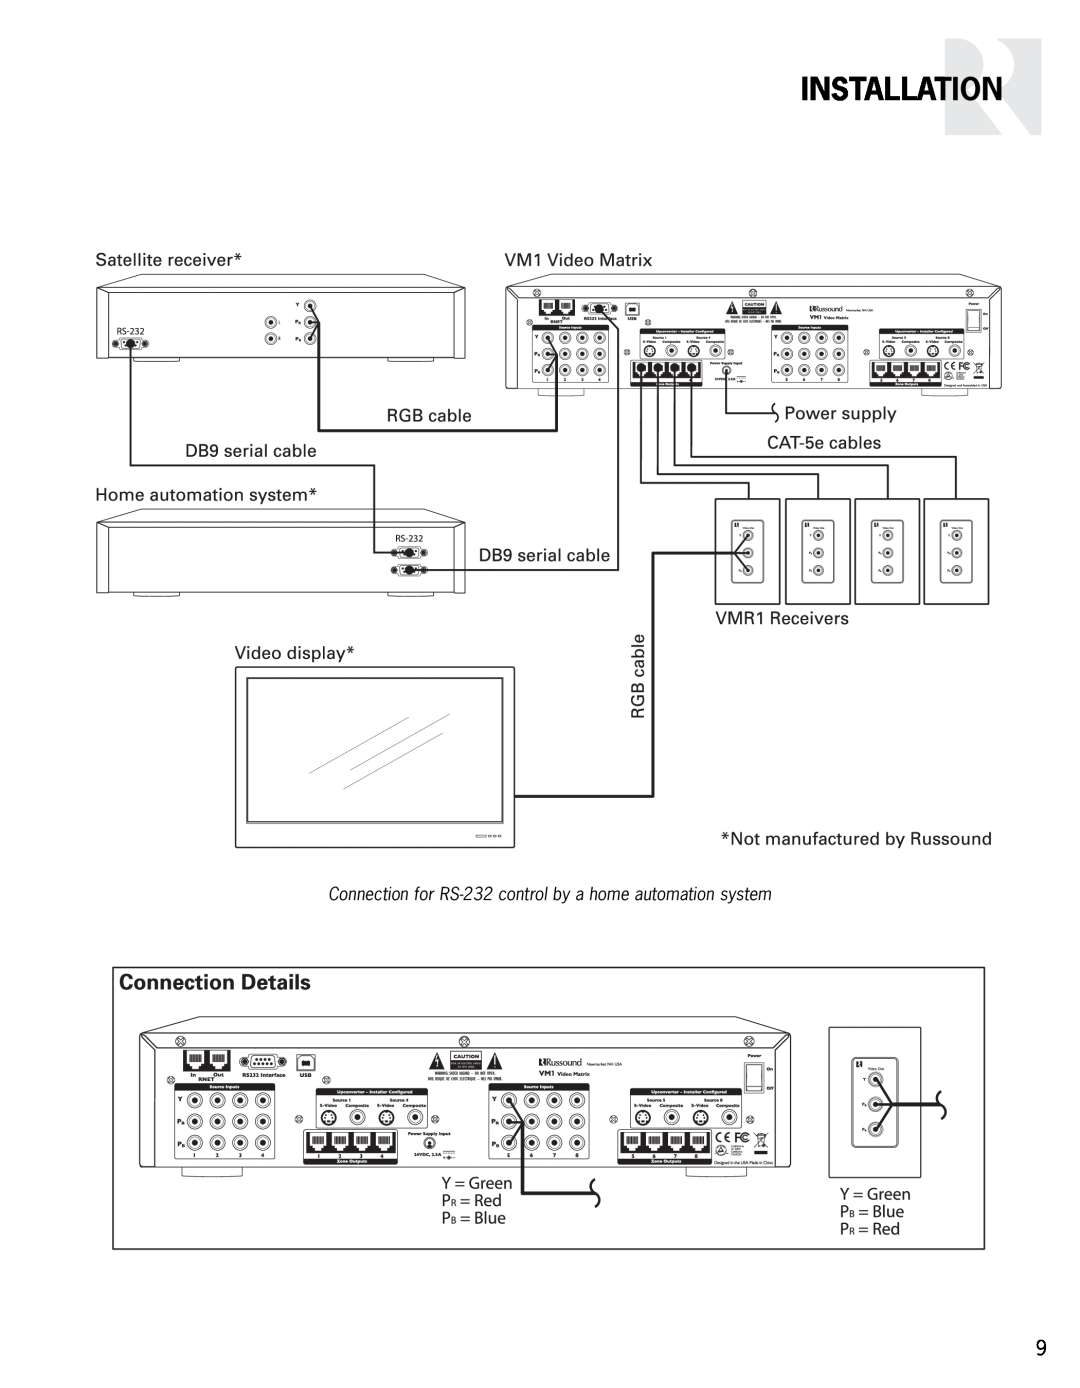 Russound VM1 manual Installation, Connection for RS-232 control by a home automation system 